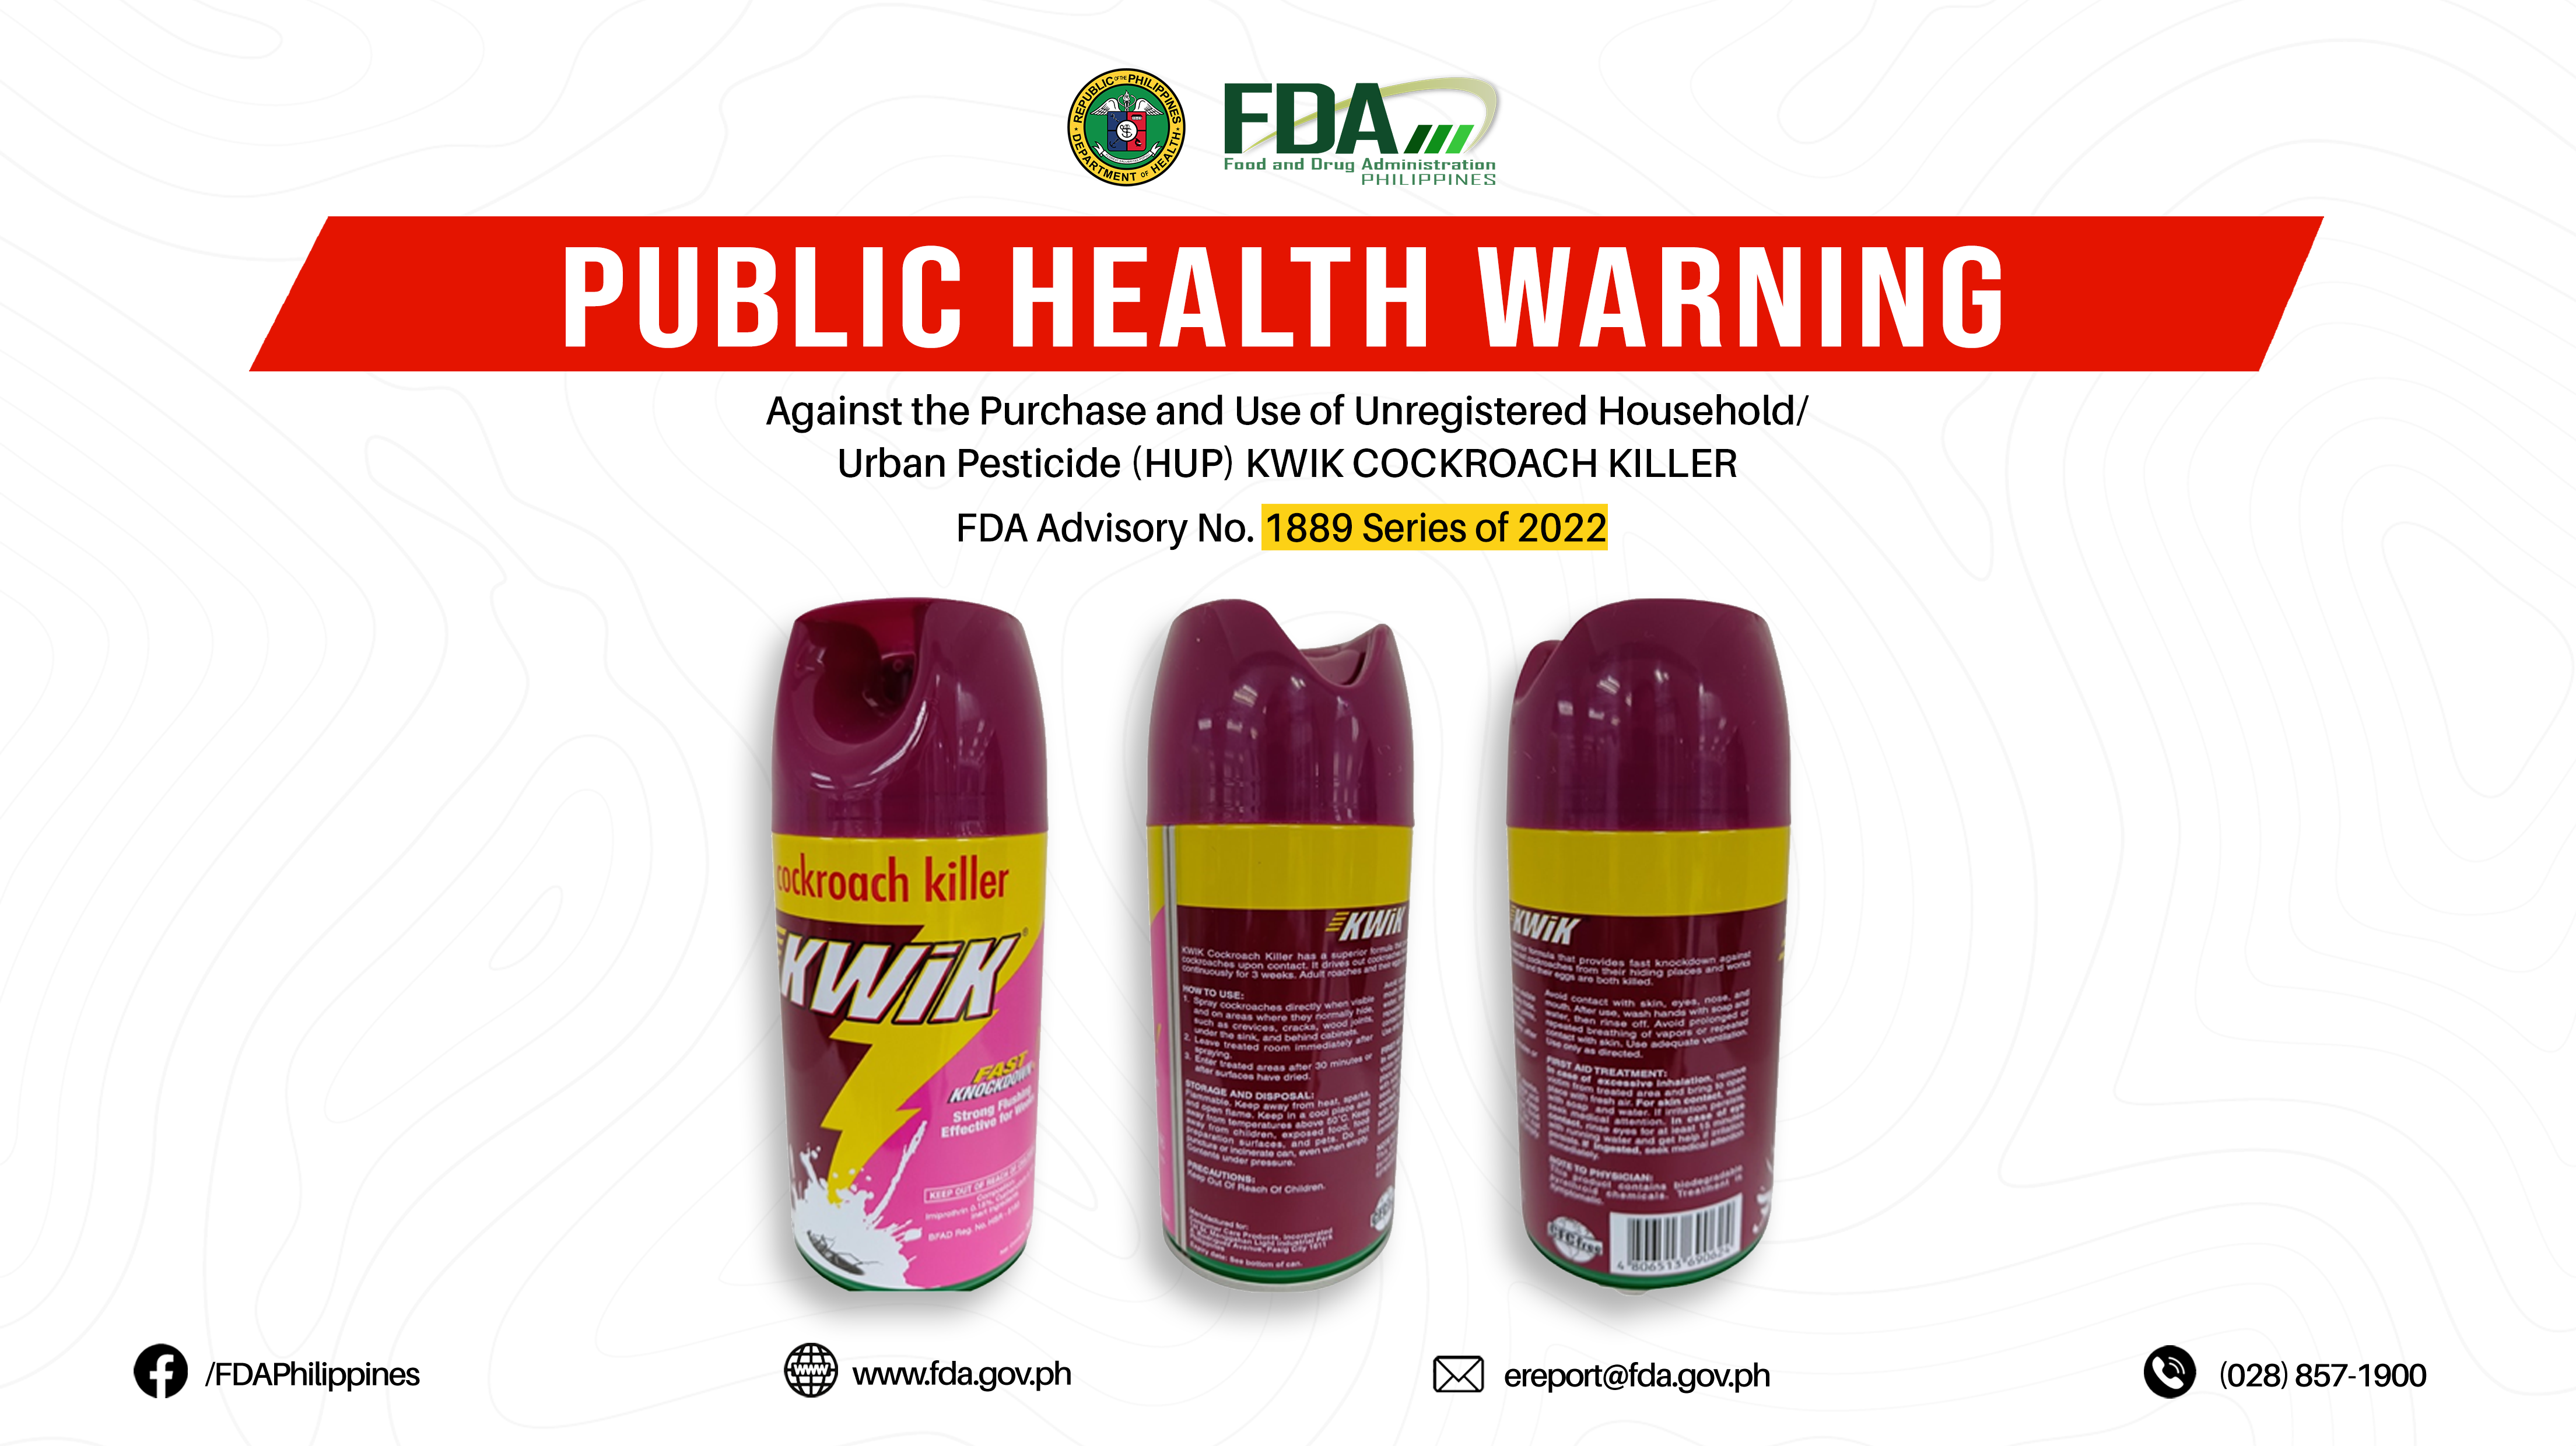 FDA Advisory No.2022-1889 || Public Health Warning Against the Purchase and Use of Unregistered Household/Urban Pesticide (HUP) KWIK COCKROACH KILLER